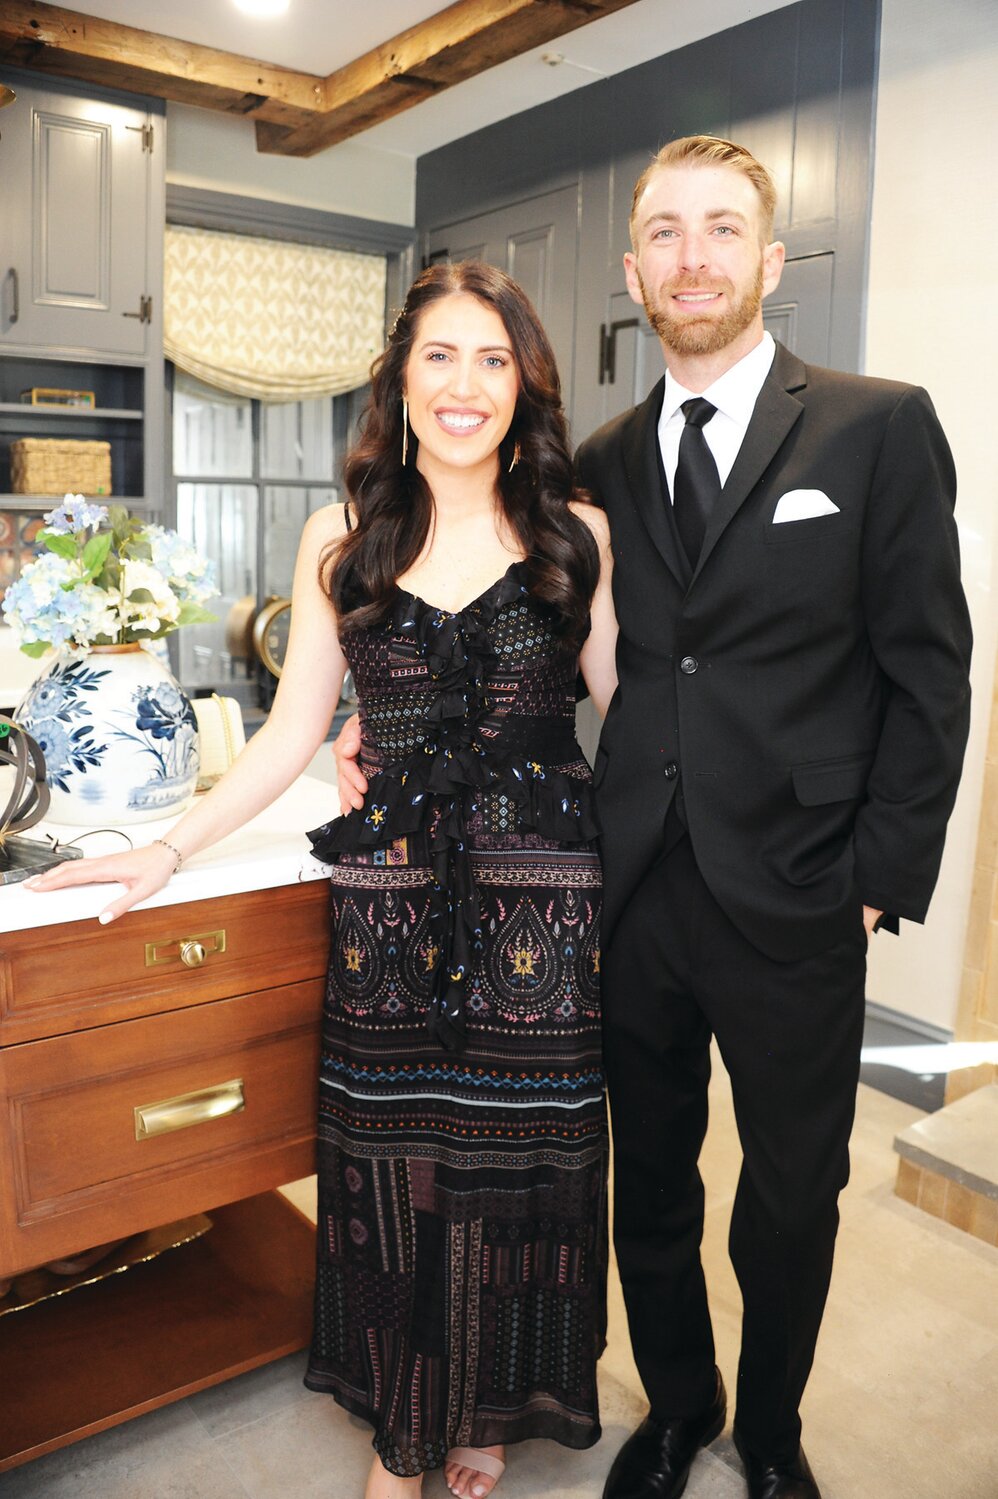 Designer of the mudroom, Nicole O’Dwyer of NS Interior Designs, and Ryan O’Dwyer.